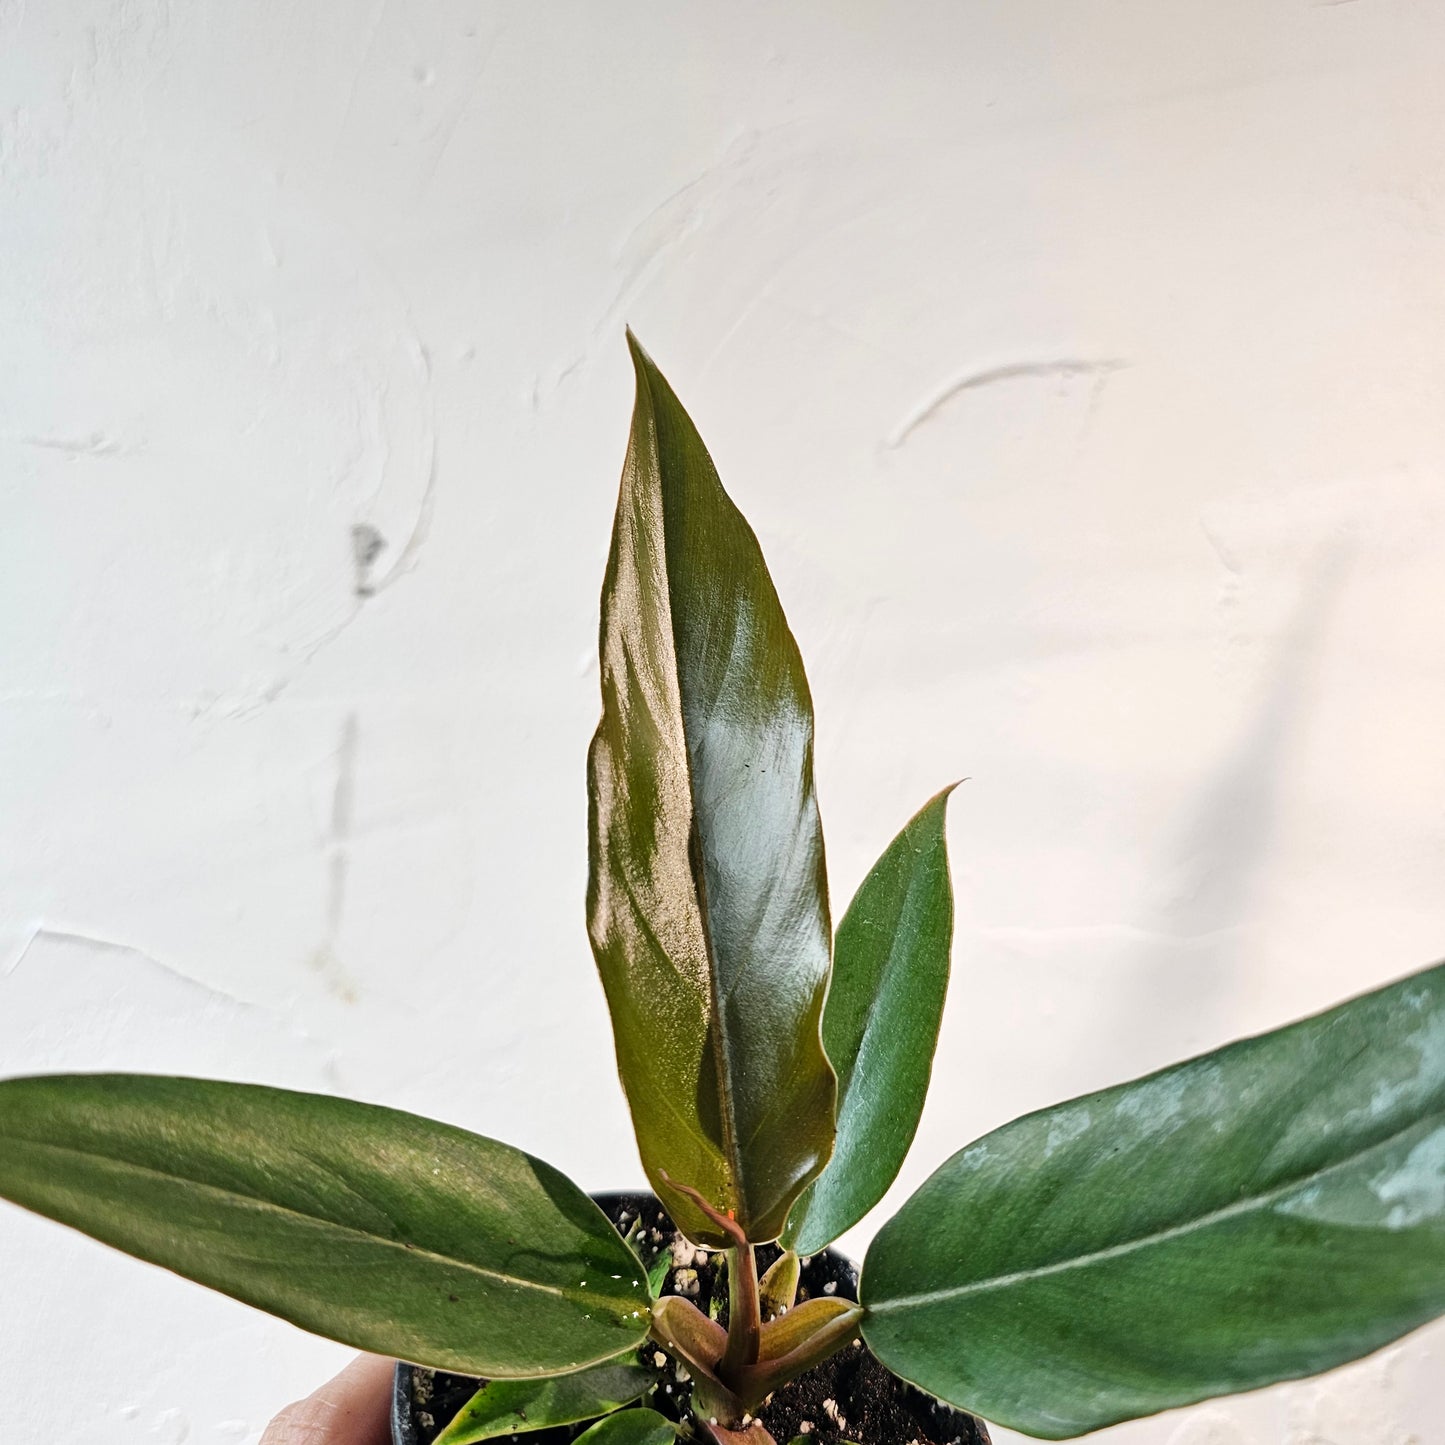 Caramel Pluto (Philodendron ssp.) in a 4 inch pot. Indoor plant for sale by Promise Supply for delivery and pickup in Toronto